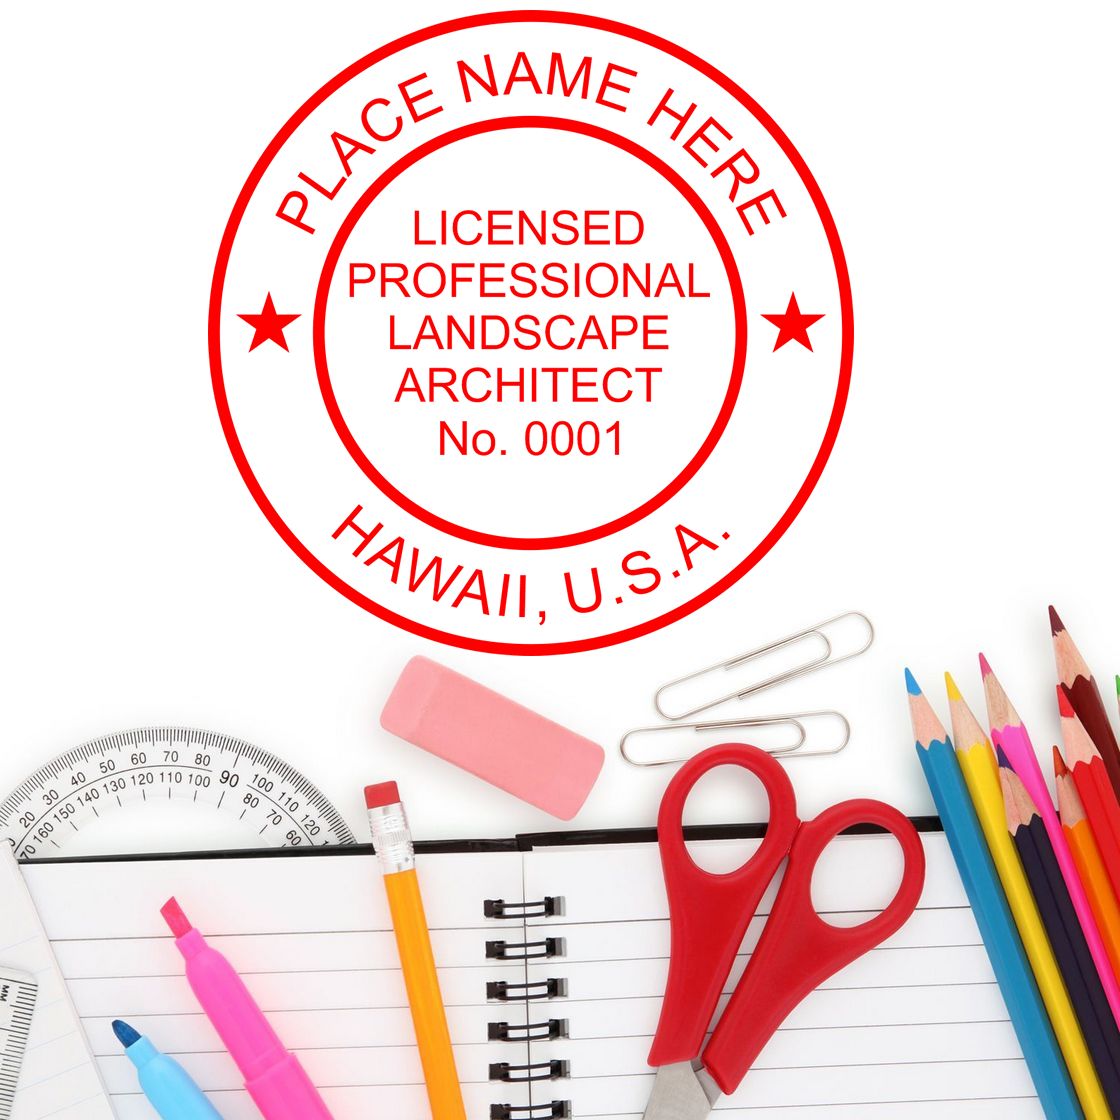 The Hawaii Landscape Architectural Seal Stamp stamp impression comes to life with a crisp, detailed photo on paper - showcasing true professional quality.